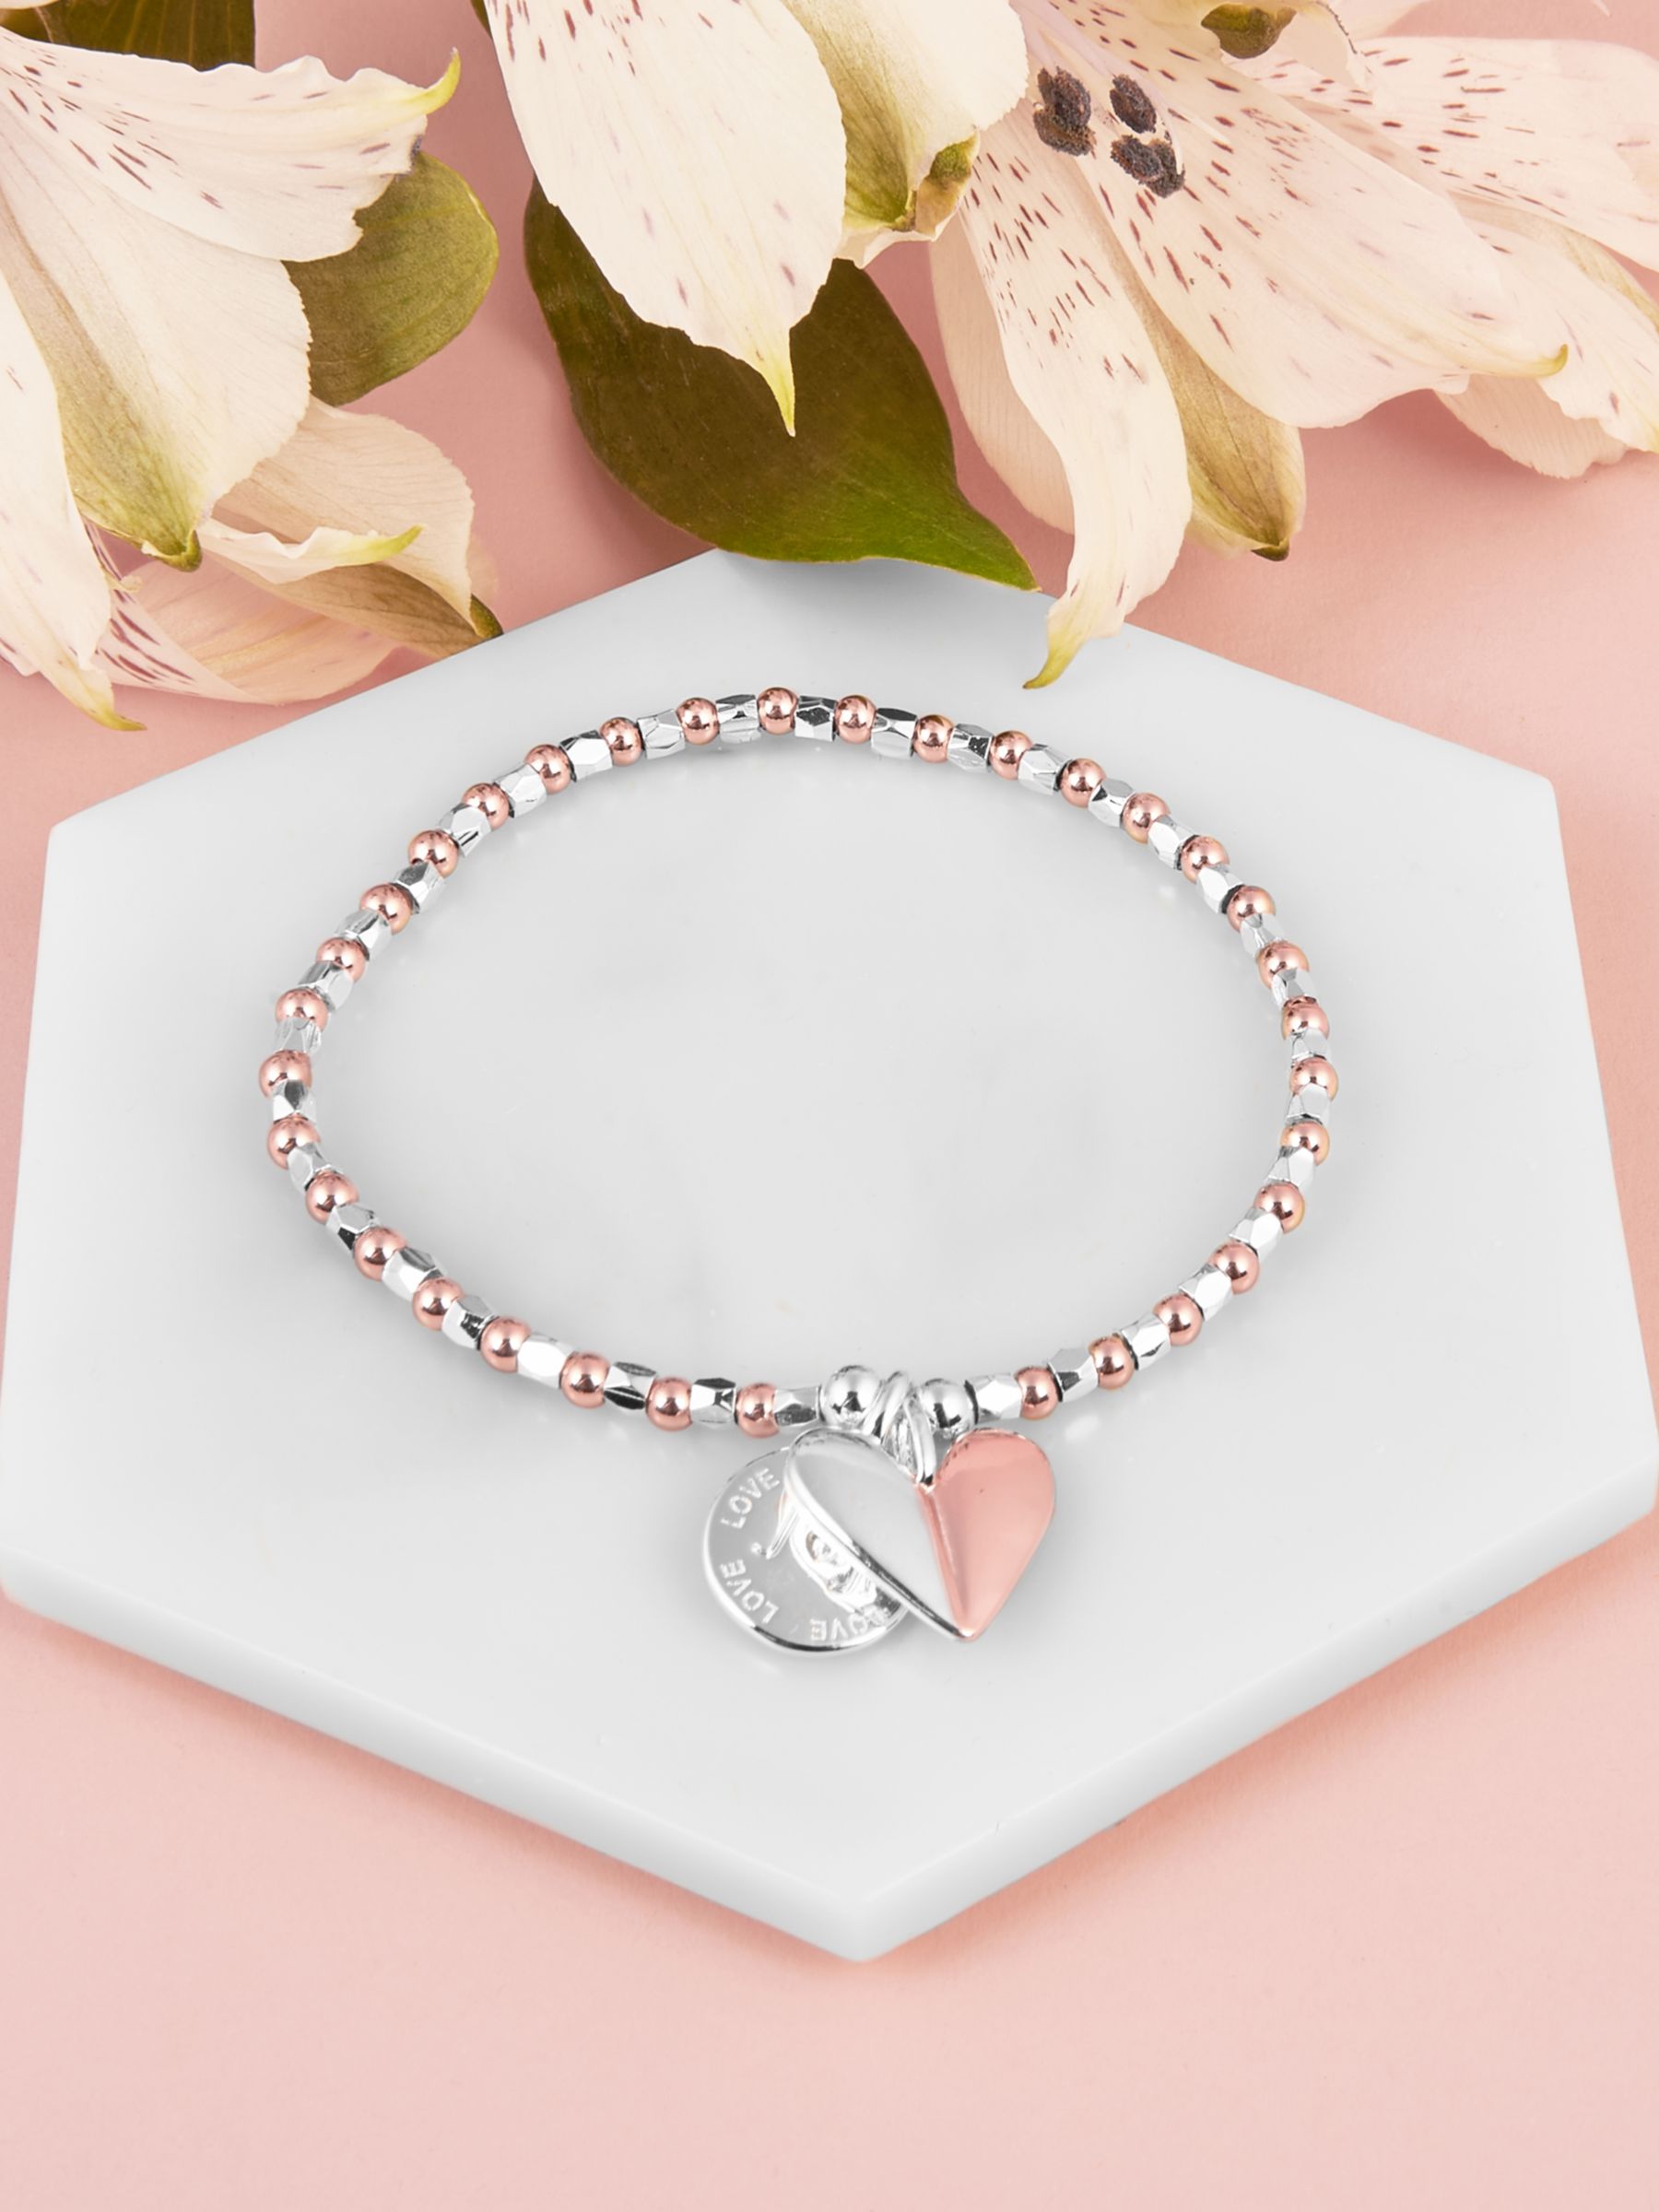 Heart Charms Giving Collection Bracelet - Jewelry - Hallmark